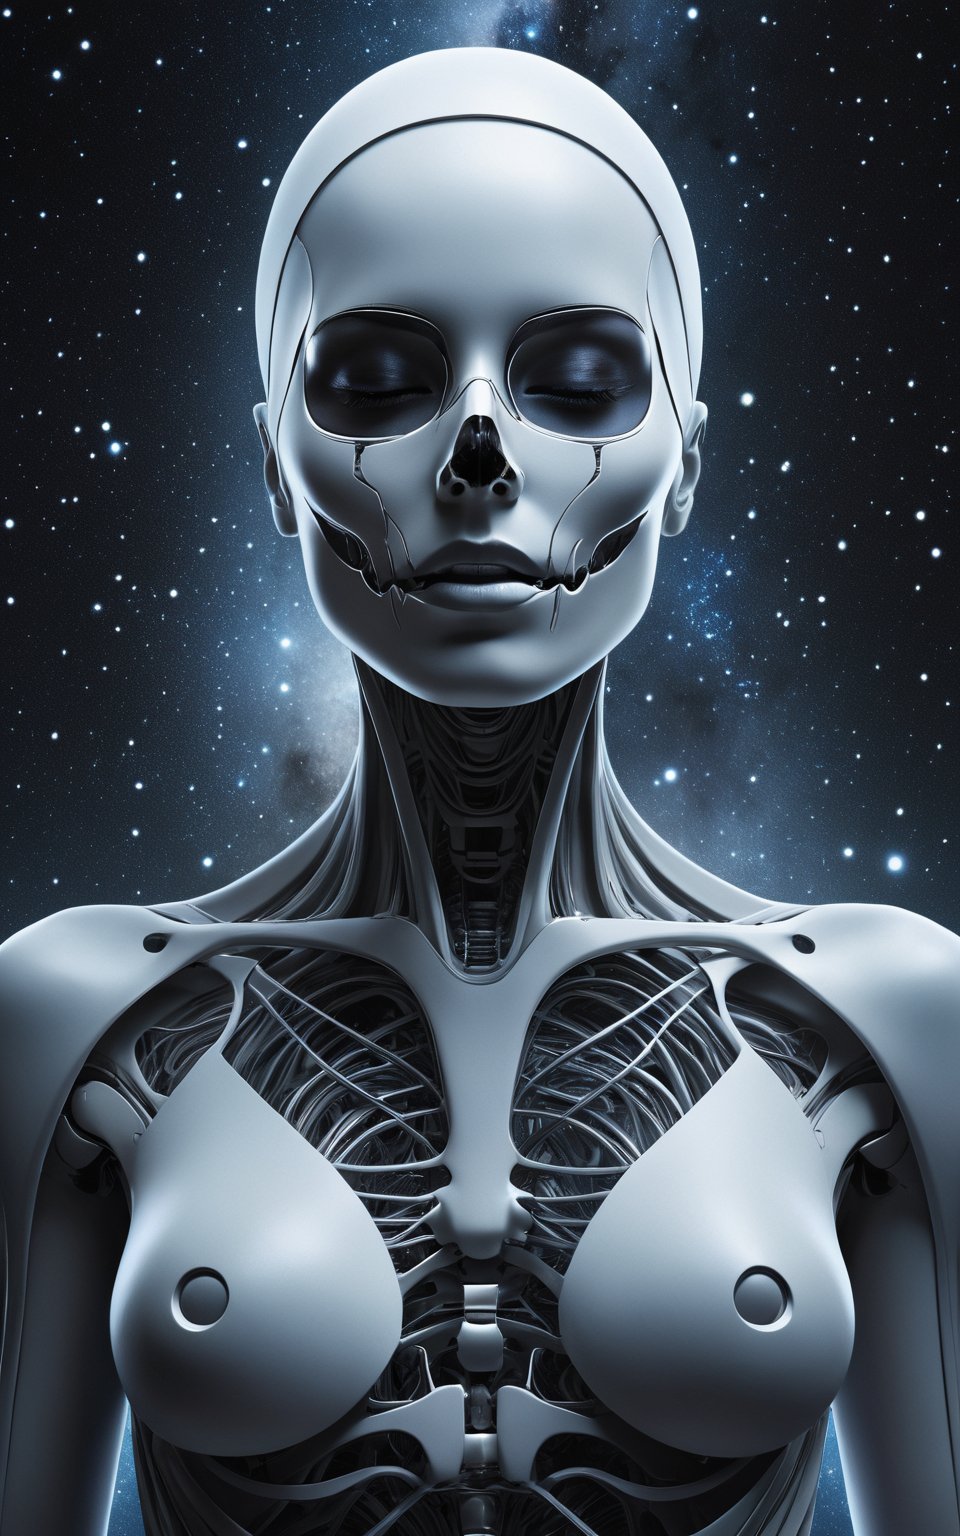 (best quality,8K,highres,masterpiece), ultra-detailed, featuring a woman with her face obscured by a grey square, set against a cosmic, star-filled background. The woman appears to be wearing or integrated with an intricate skeletal structure that is white and somewhat luminescent. The cosmic backdrop bathes the scene in a mesmerizing array of stars and galaxies, creating a sense of vastness and wonder. The obscured face adds an air of mystery and intrigue, inviting viewers to ponder the hidden depths of the character's identity. Meanwhile, the intricate skeletal structure adds a touch of ethereal beauty and symbolism, hinting at themes of mortality, transformation, and the interconnectedness of all things. This artwork is a captivating exploration of the human form amidst the cosmic expanse, blending elements of mystery, beauty, and cosmic wonder.